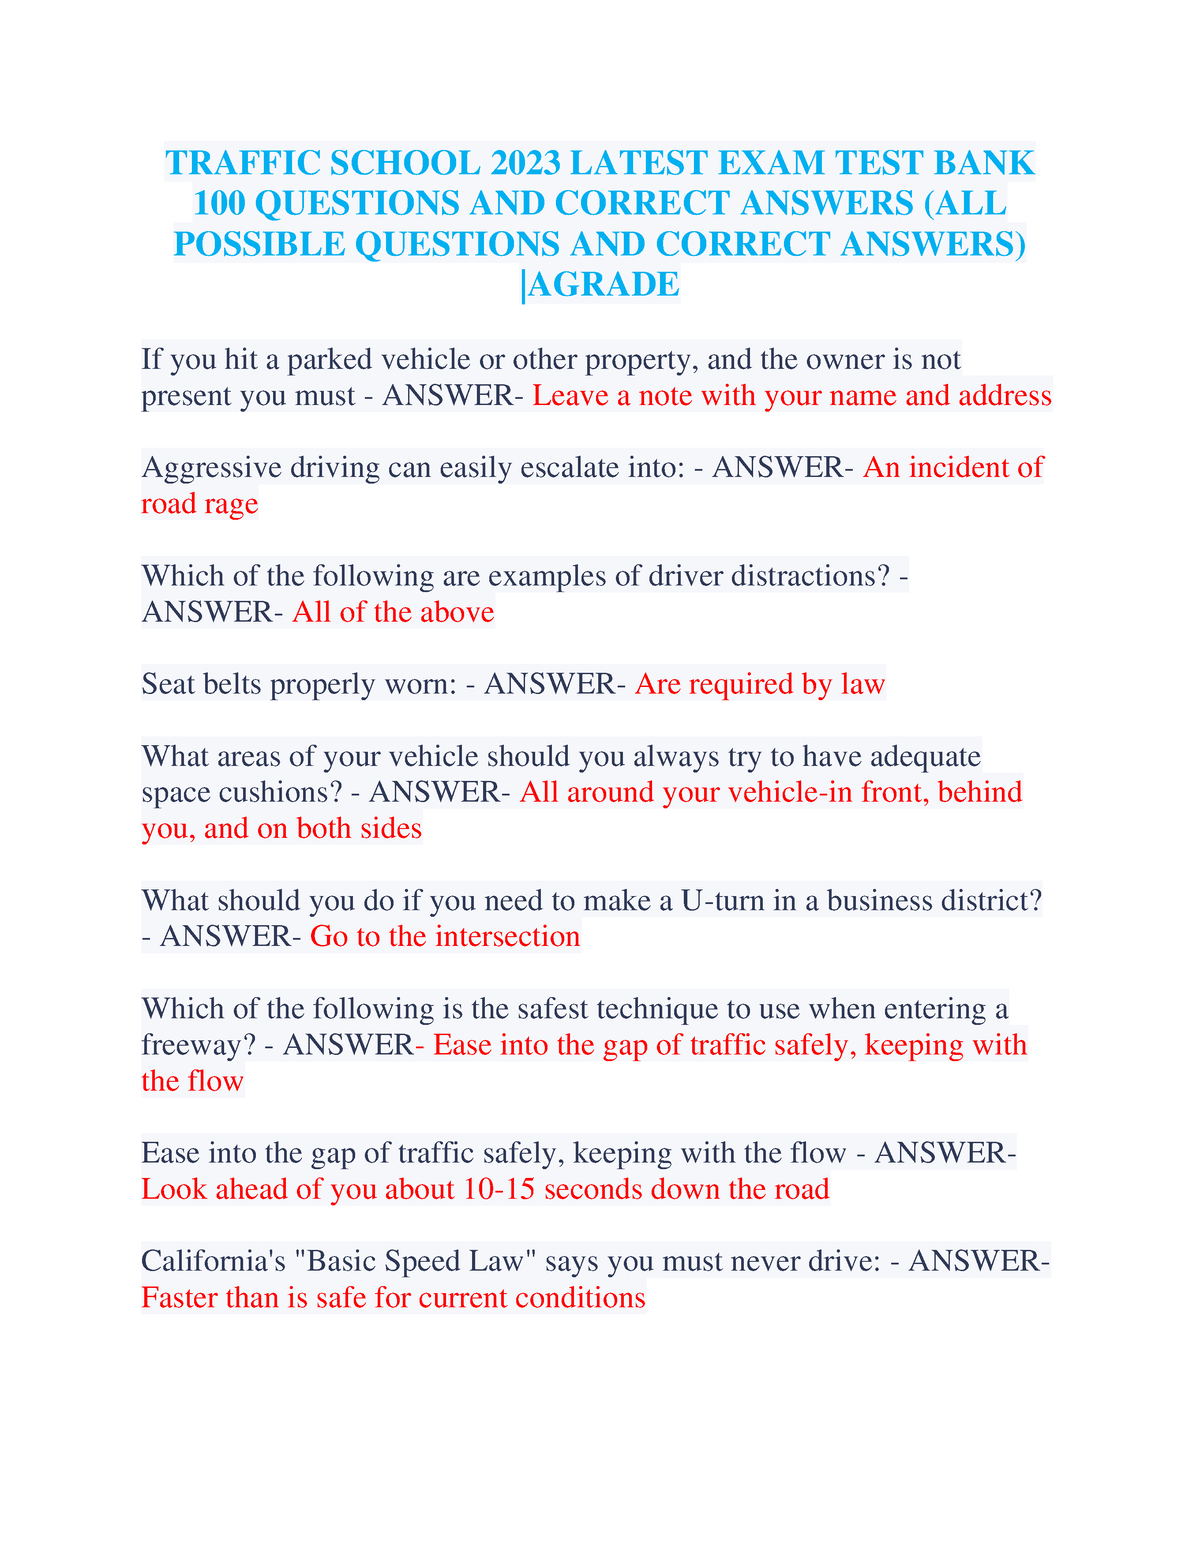 Traffic School 2023 Latest EXAM TEST BANK 100 Questions AND Correct